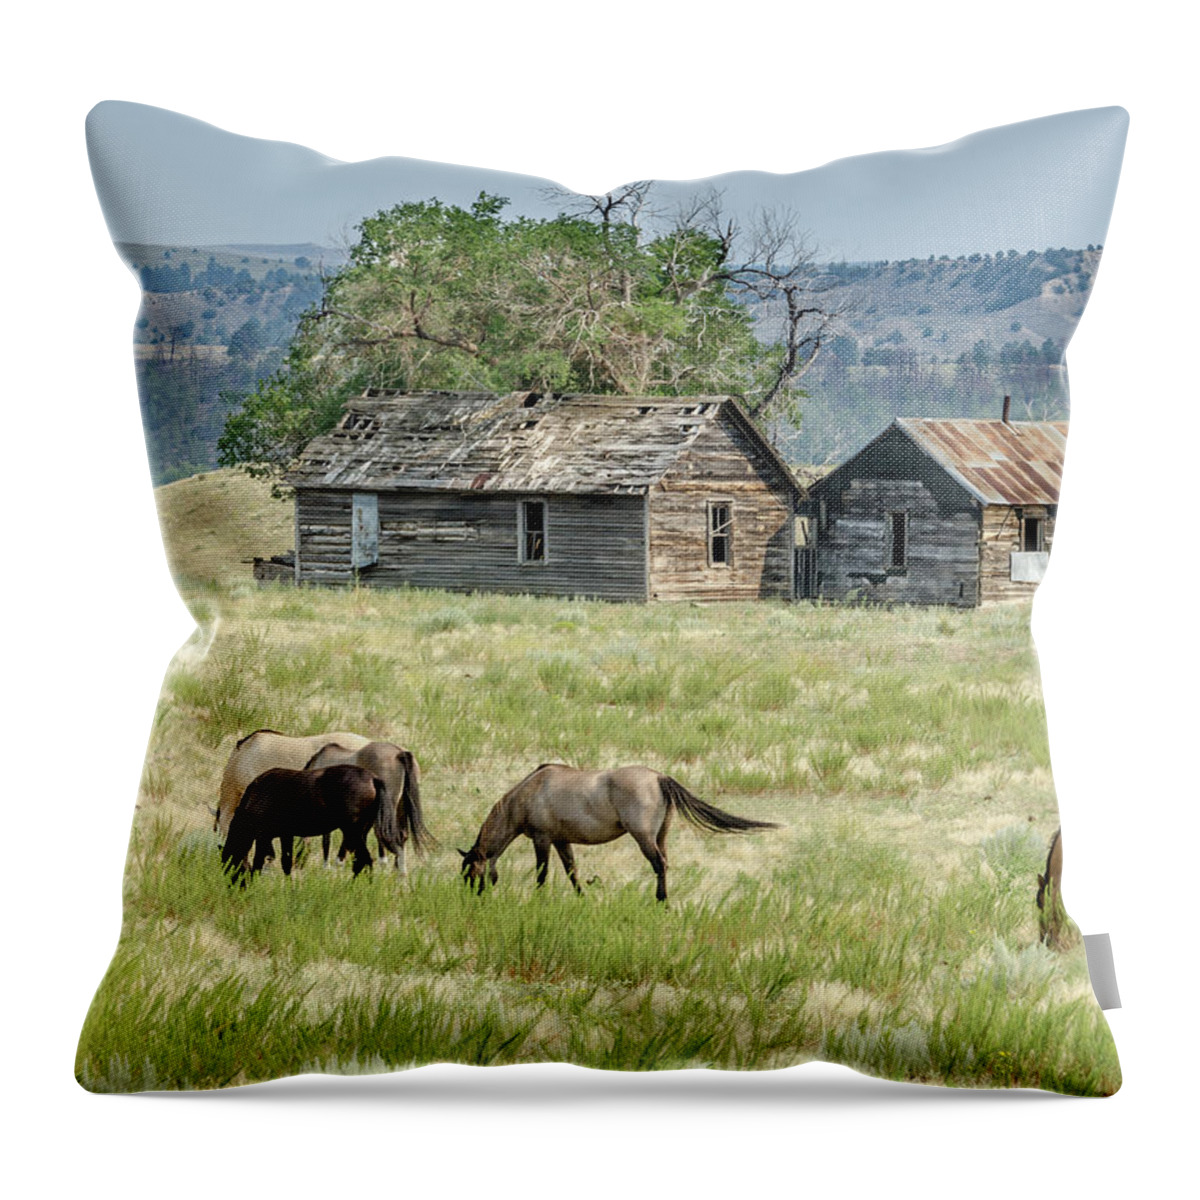 Horses Throw Pillow featuring the photograph Mexican Mustangs by Jaime Mercado